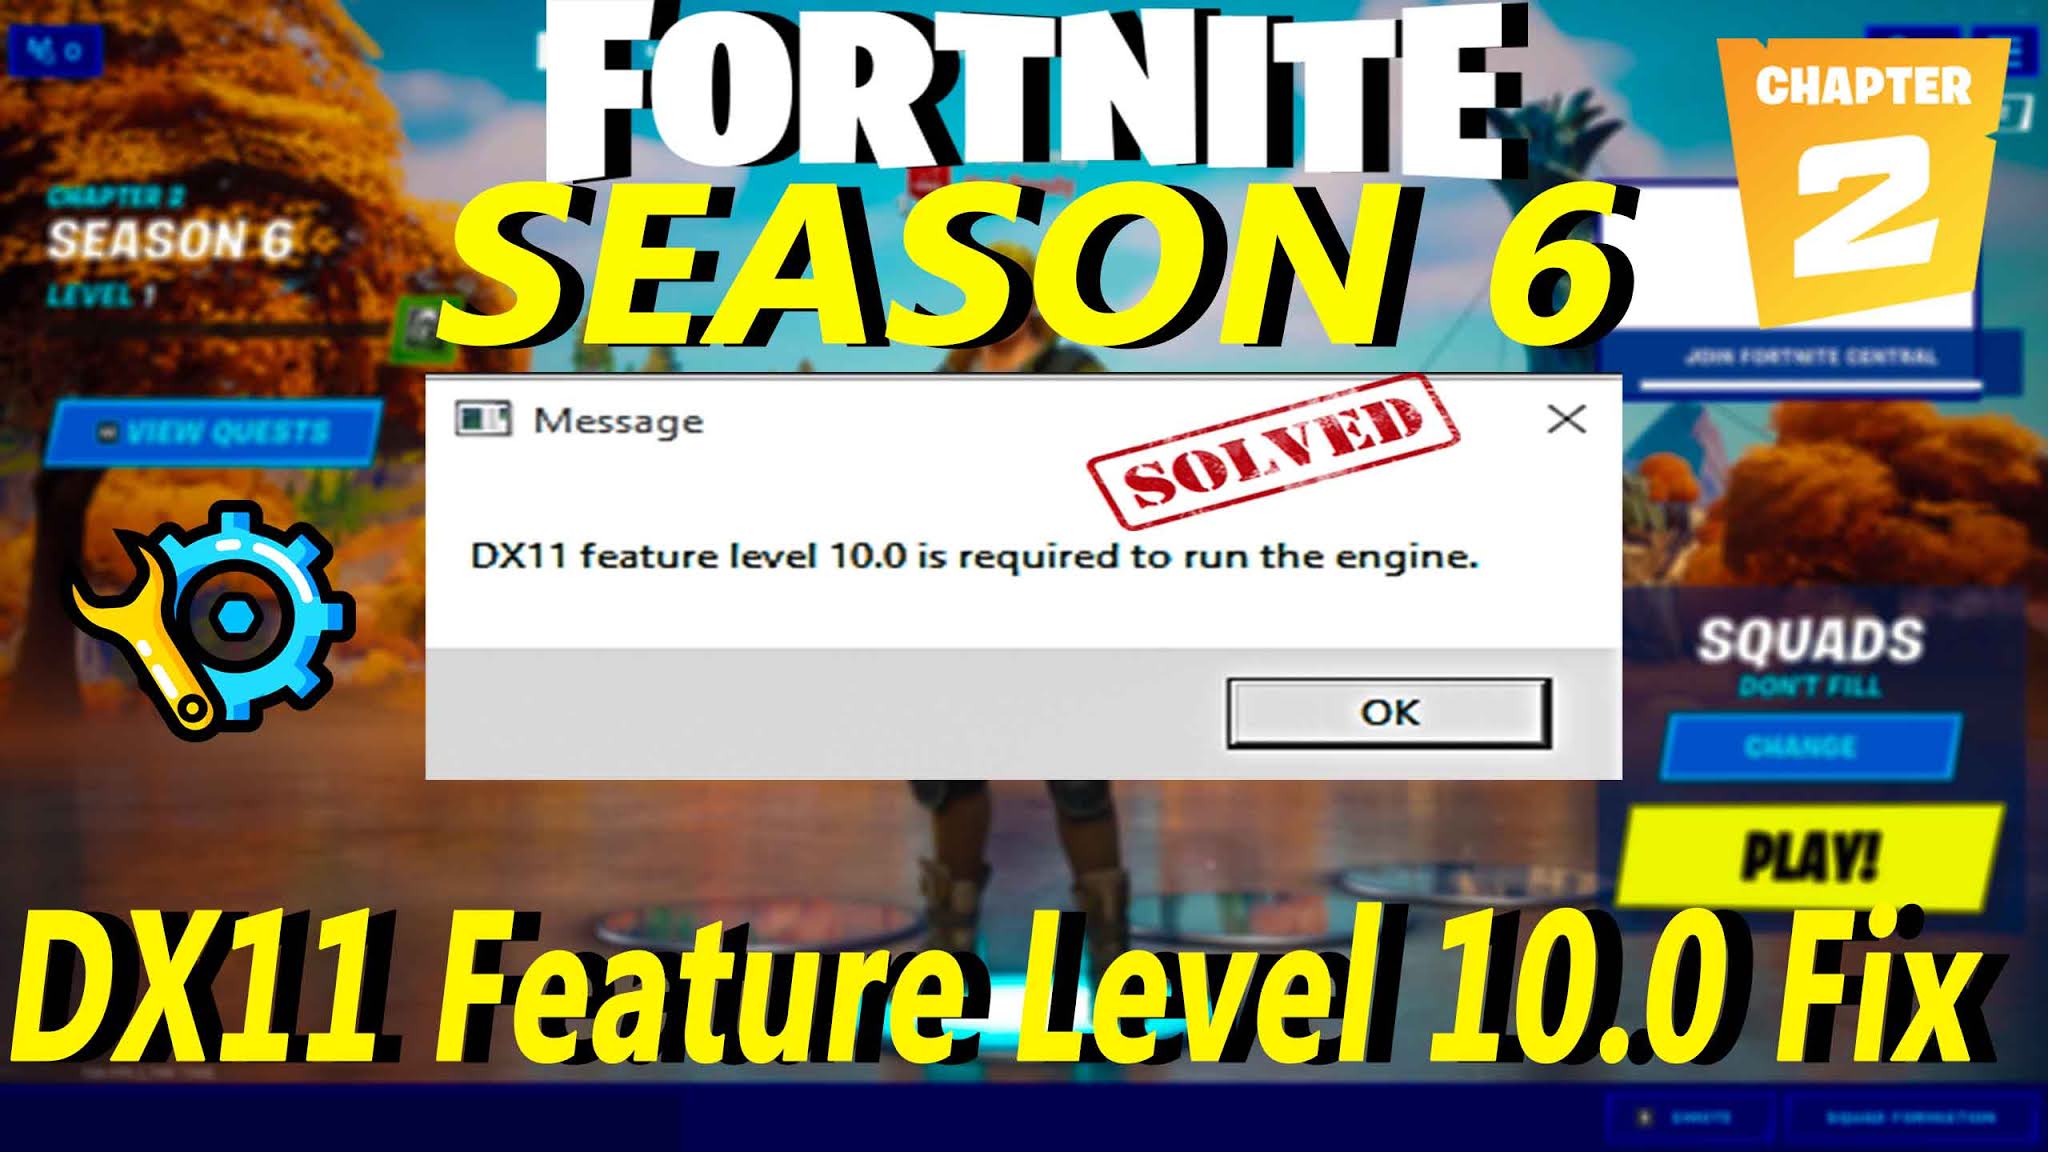 Dx11 feature. Dx11 feature Level 10.0 is required to Run the engine как исправить. Dx11 feature Level 10.0 is required to Run the engine. Message dx11 feature Level 100 is required to Run the engine что за ошибка.